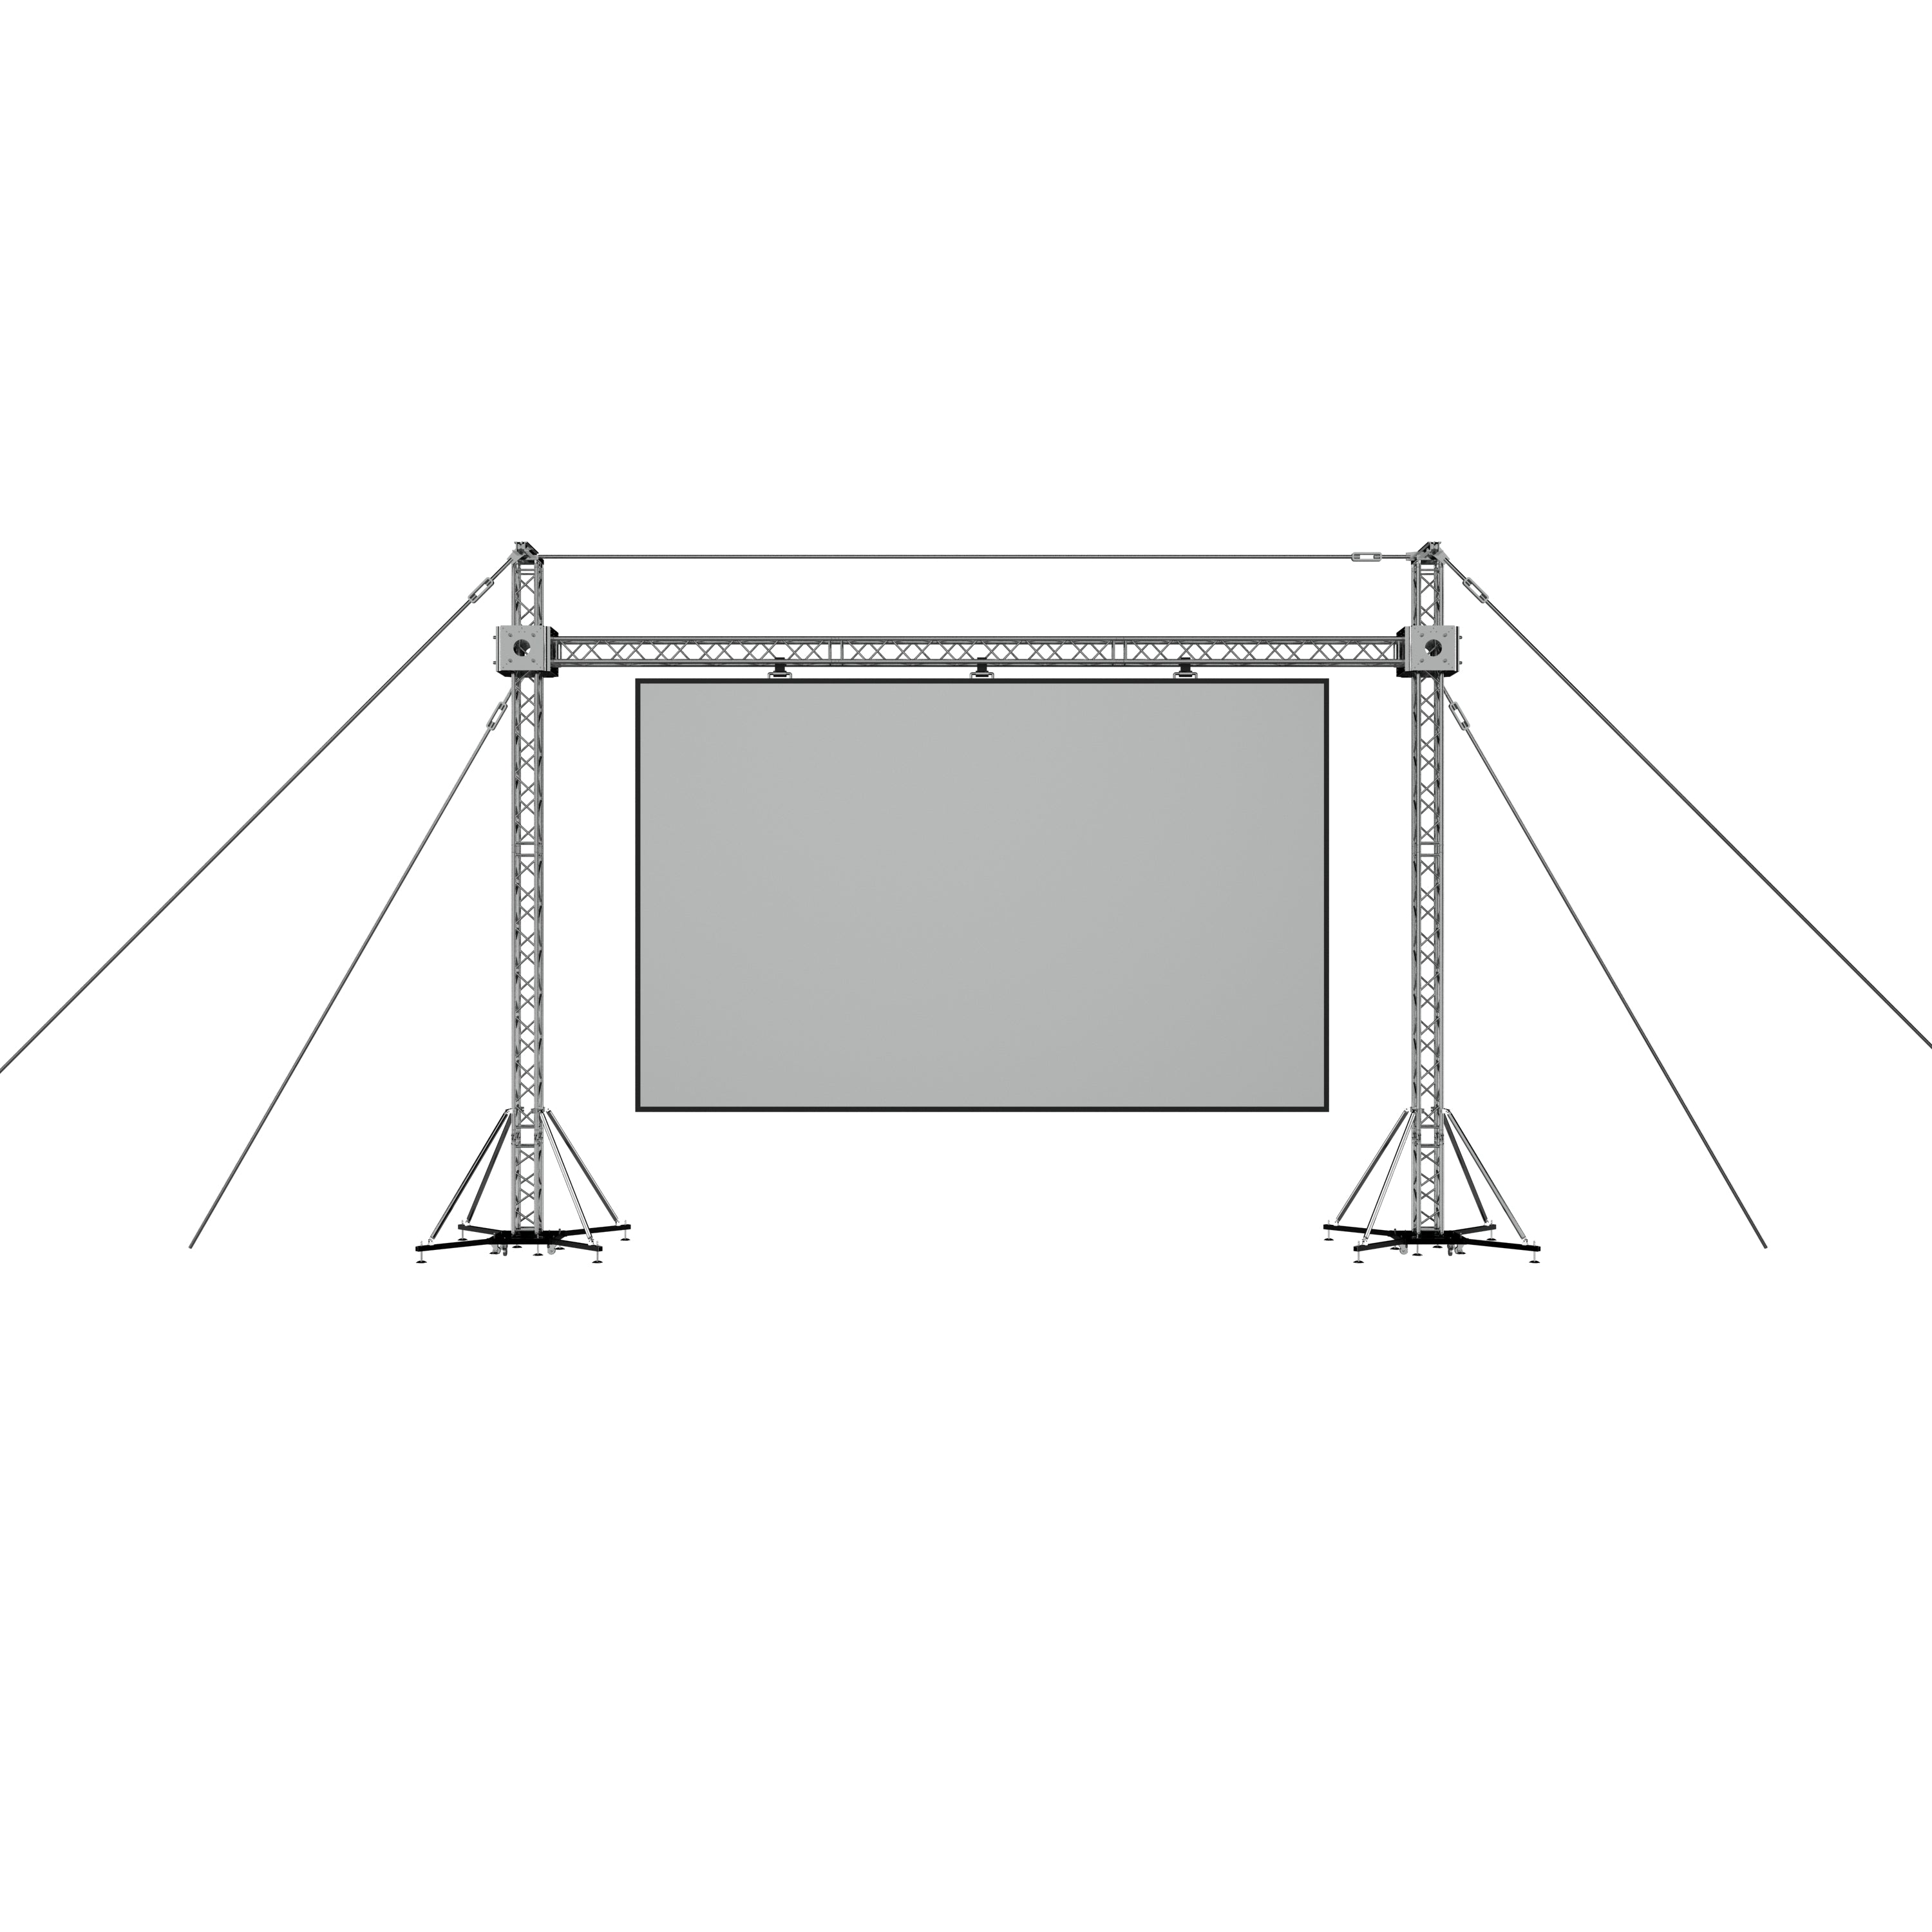 Pro X LED Screen Display Panel Video Fly Wall Truss Ground Support System 30'W x 23'H with Hoist XTP-GS3023